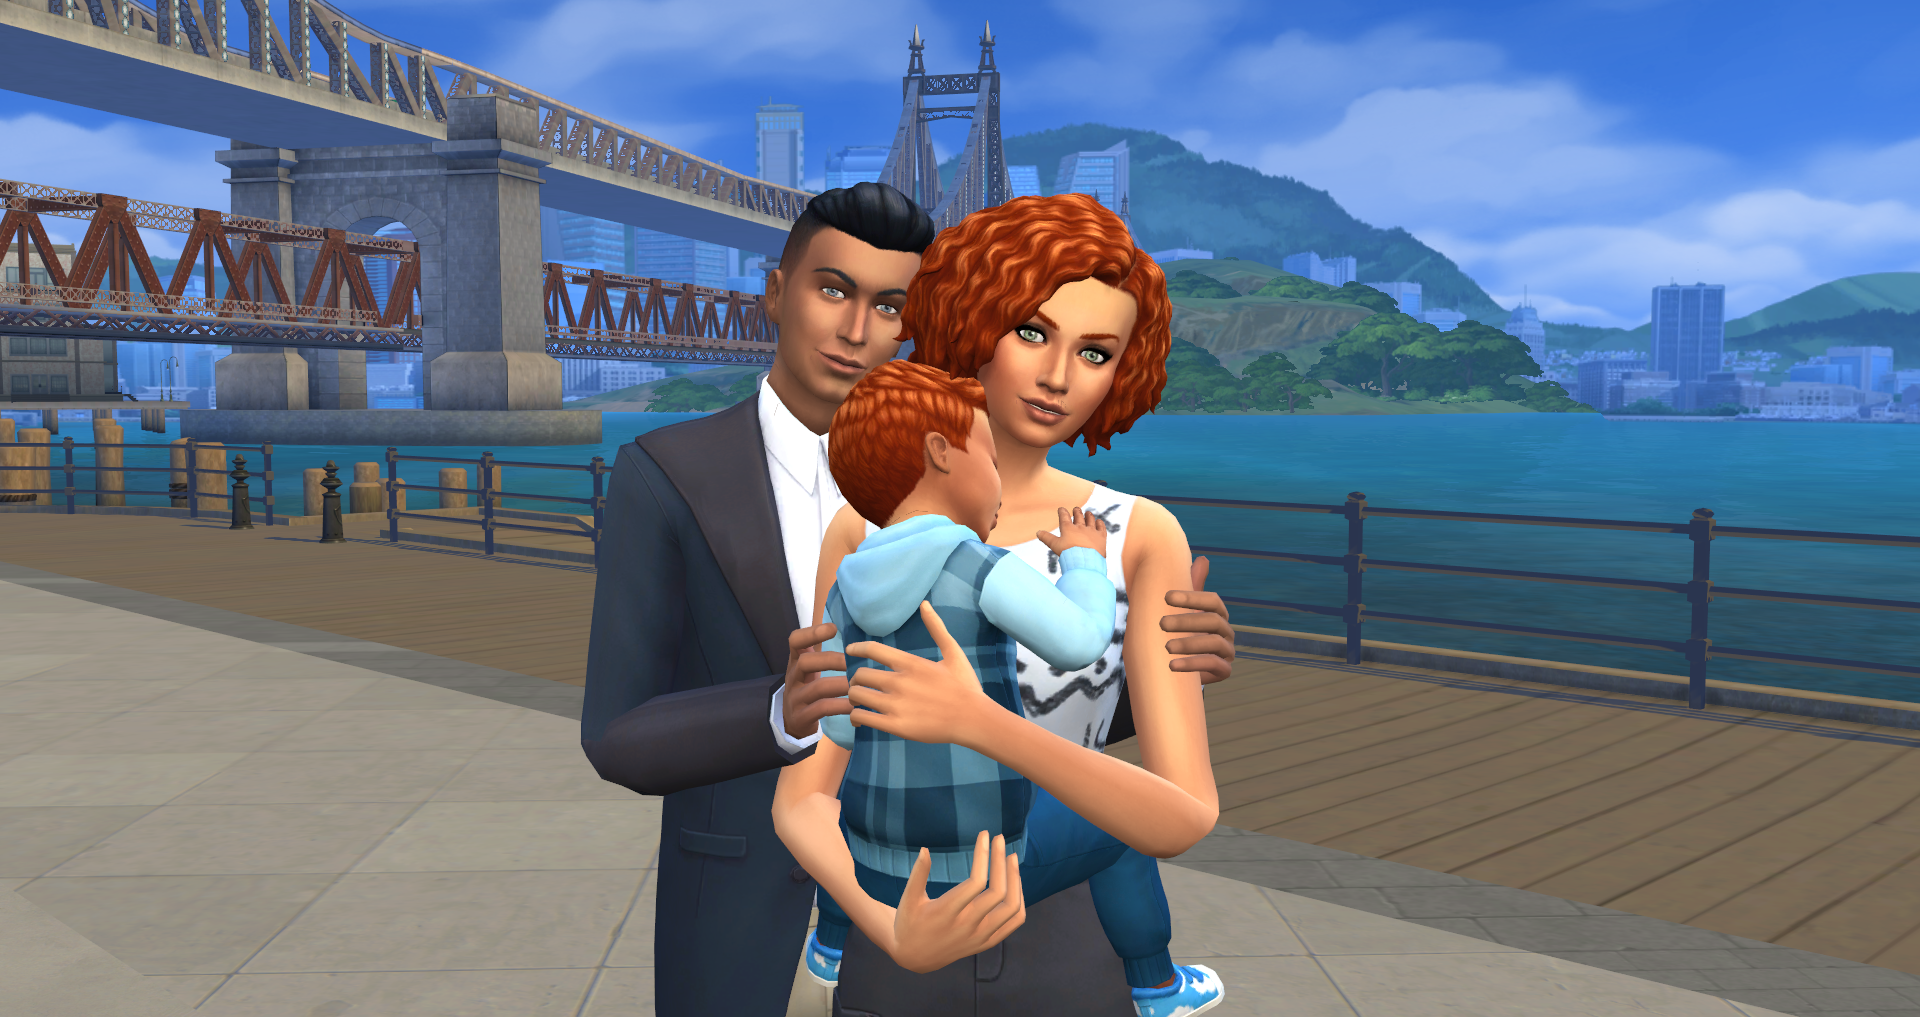 More family portraits! Pleasant - Curious/Smith - Newbie : r/thesims